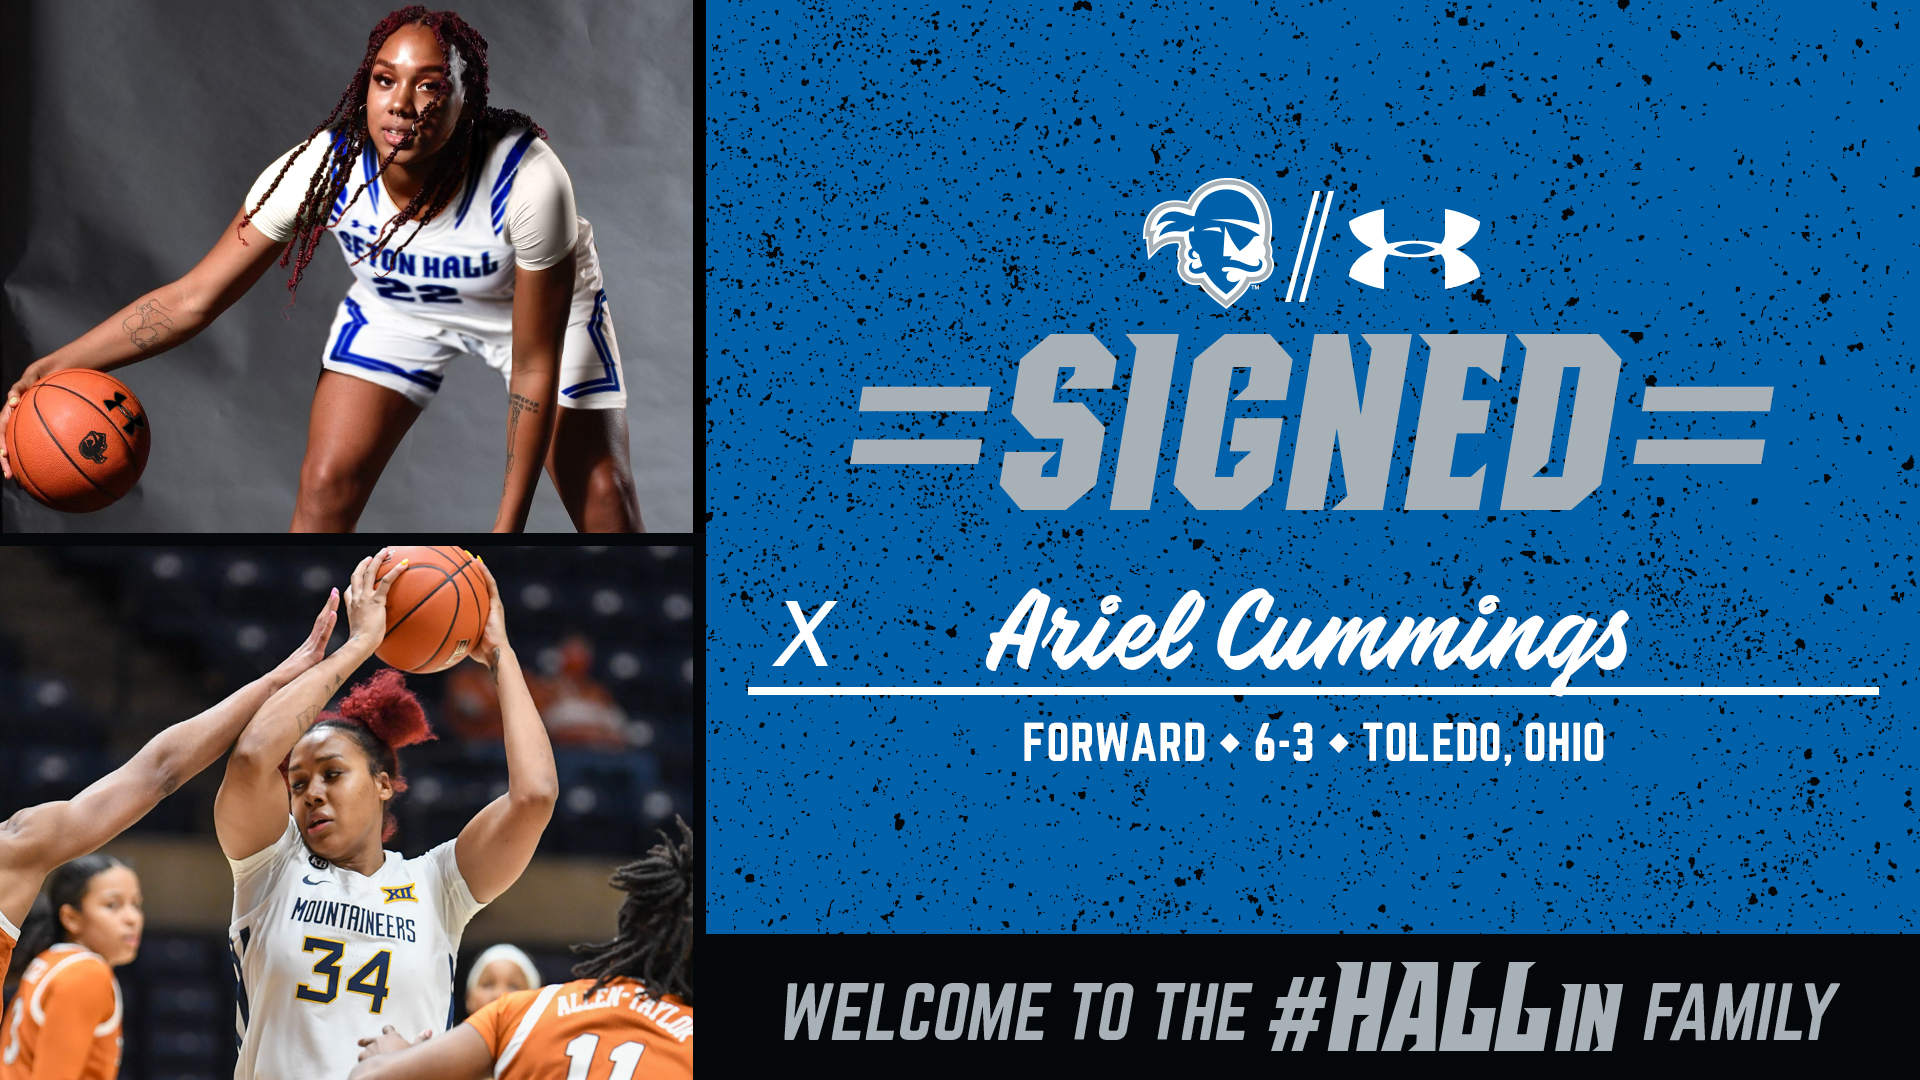 A graphic of Ariel Cummings is shown as she transfers from West Virginia to Seton Hall.